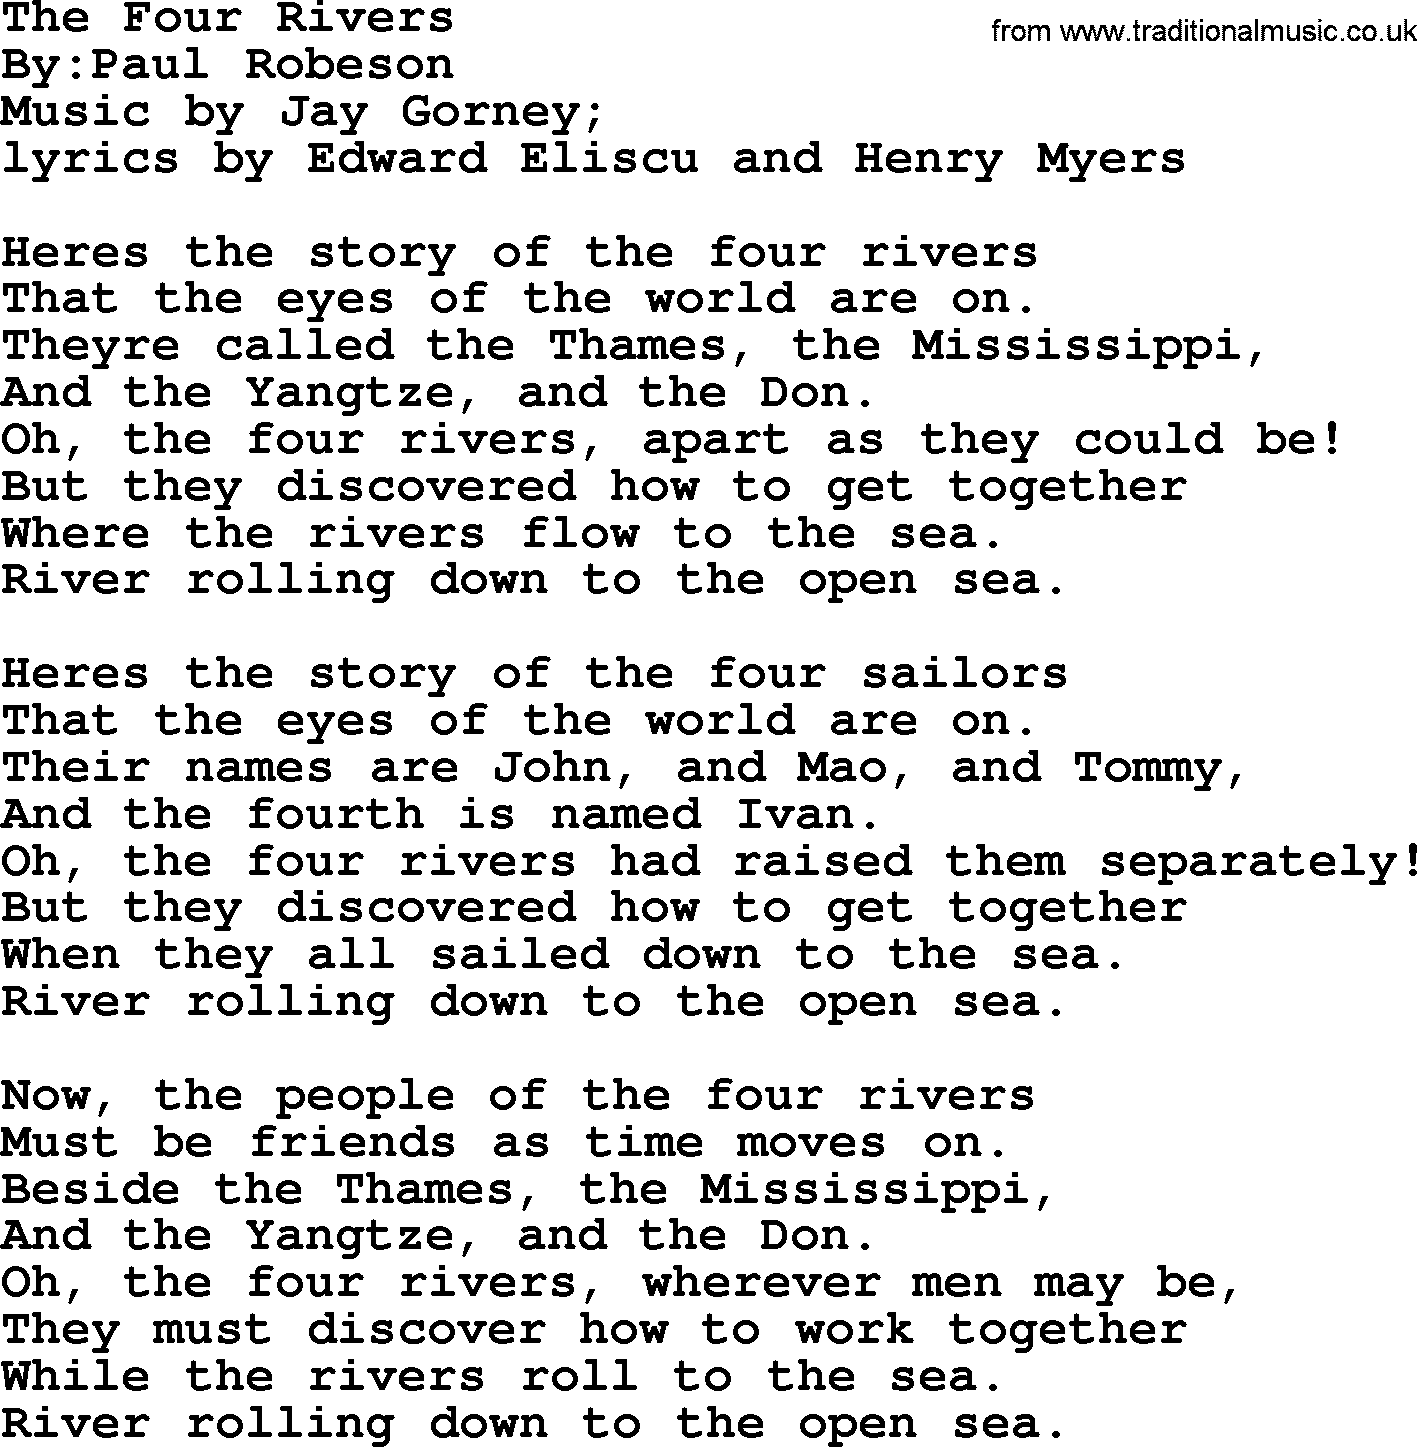 Political, Solidarity, Workers or Union song: The Four Rivers, lyrics